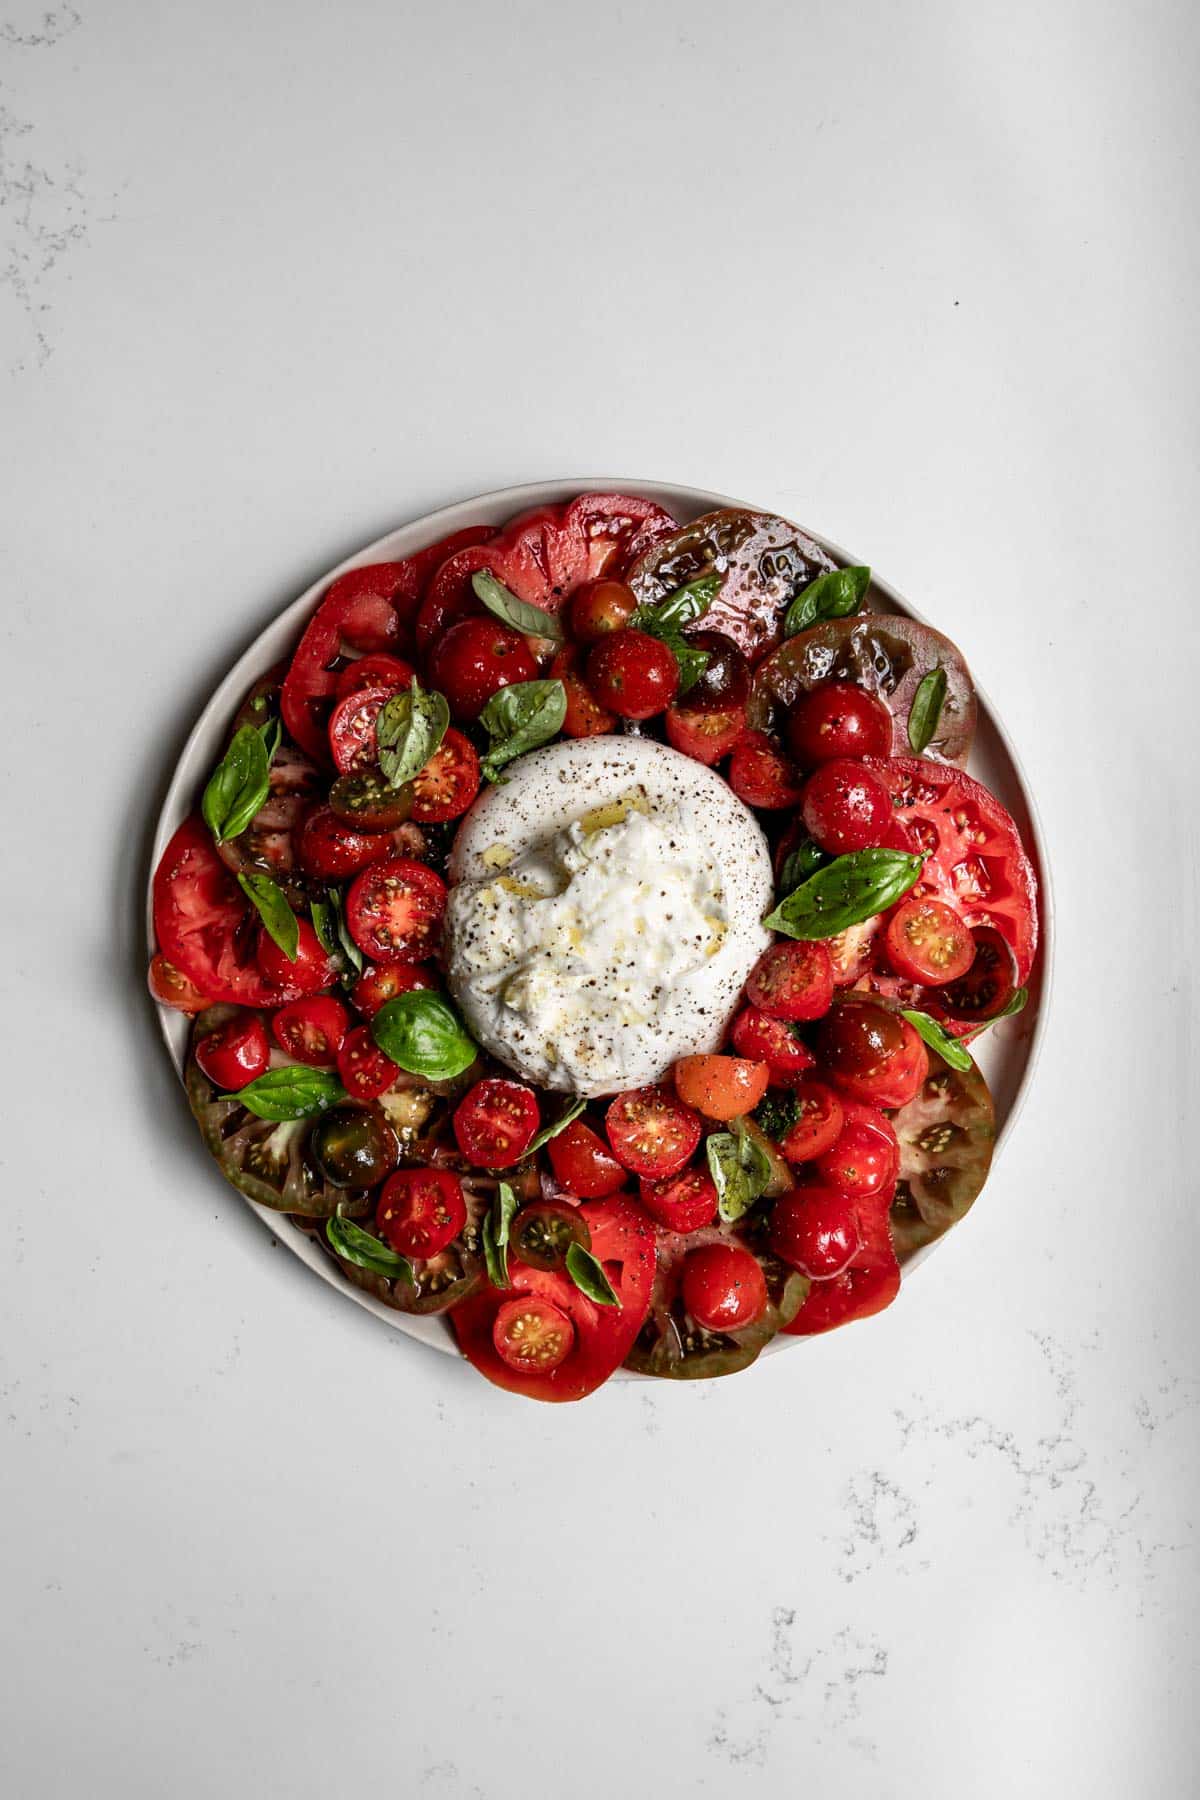 Burrata caprese salad on a white plate with white marble background.